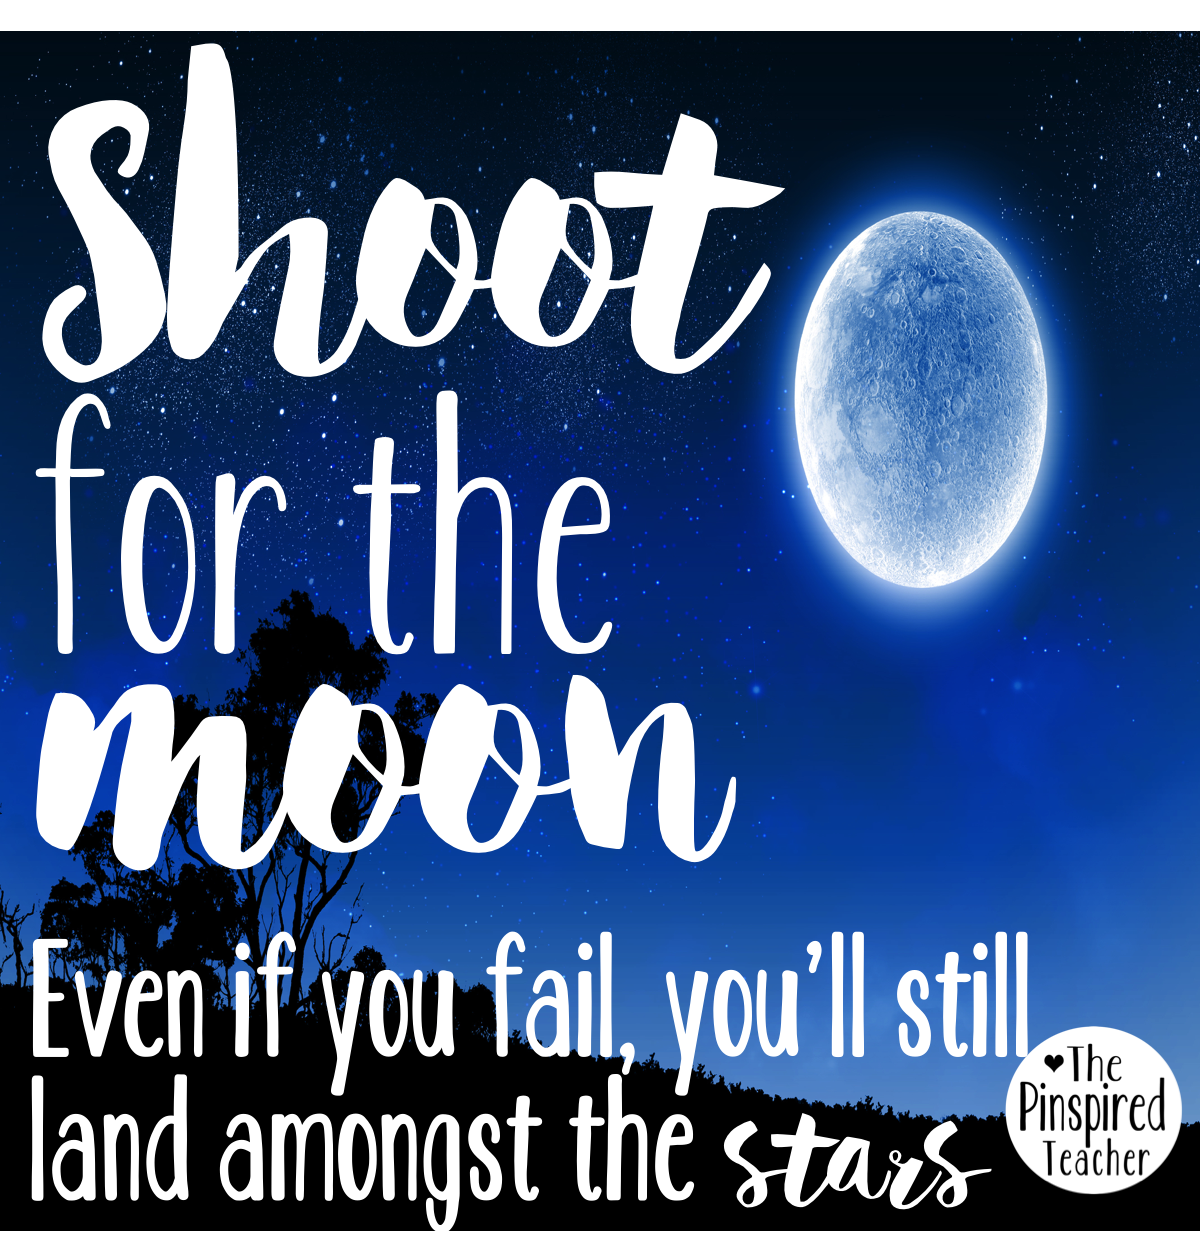 shoot for the moon even if you fail youll still land amongst the stars by the pinspired teacher